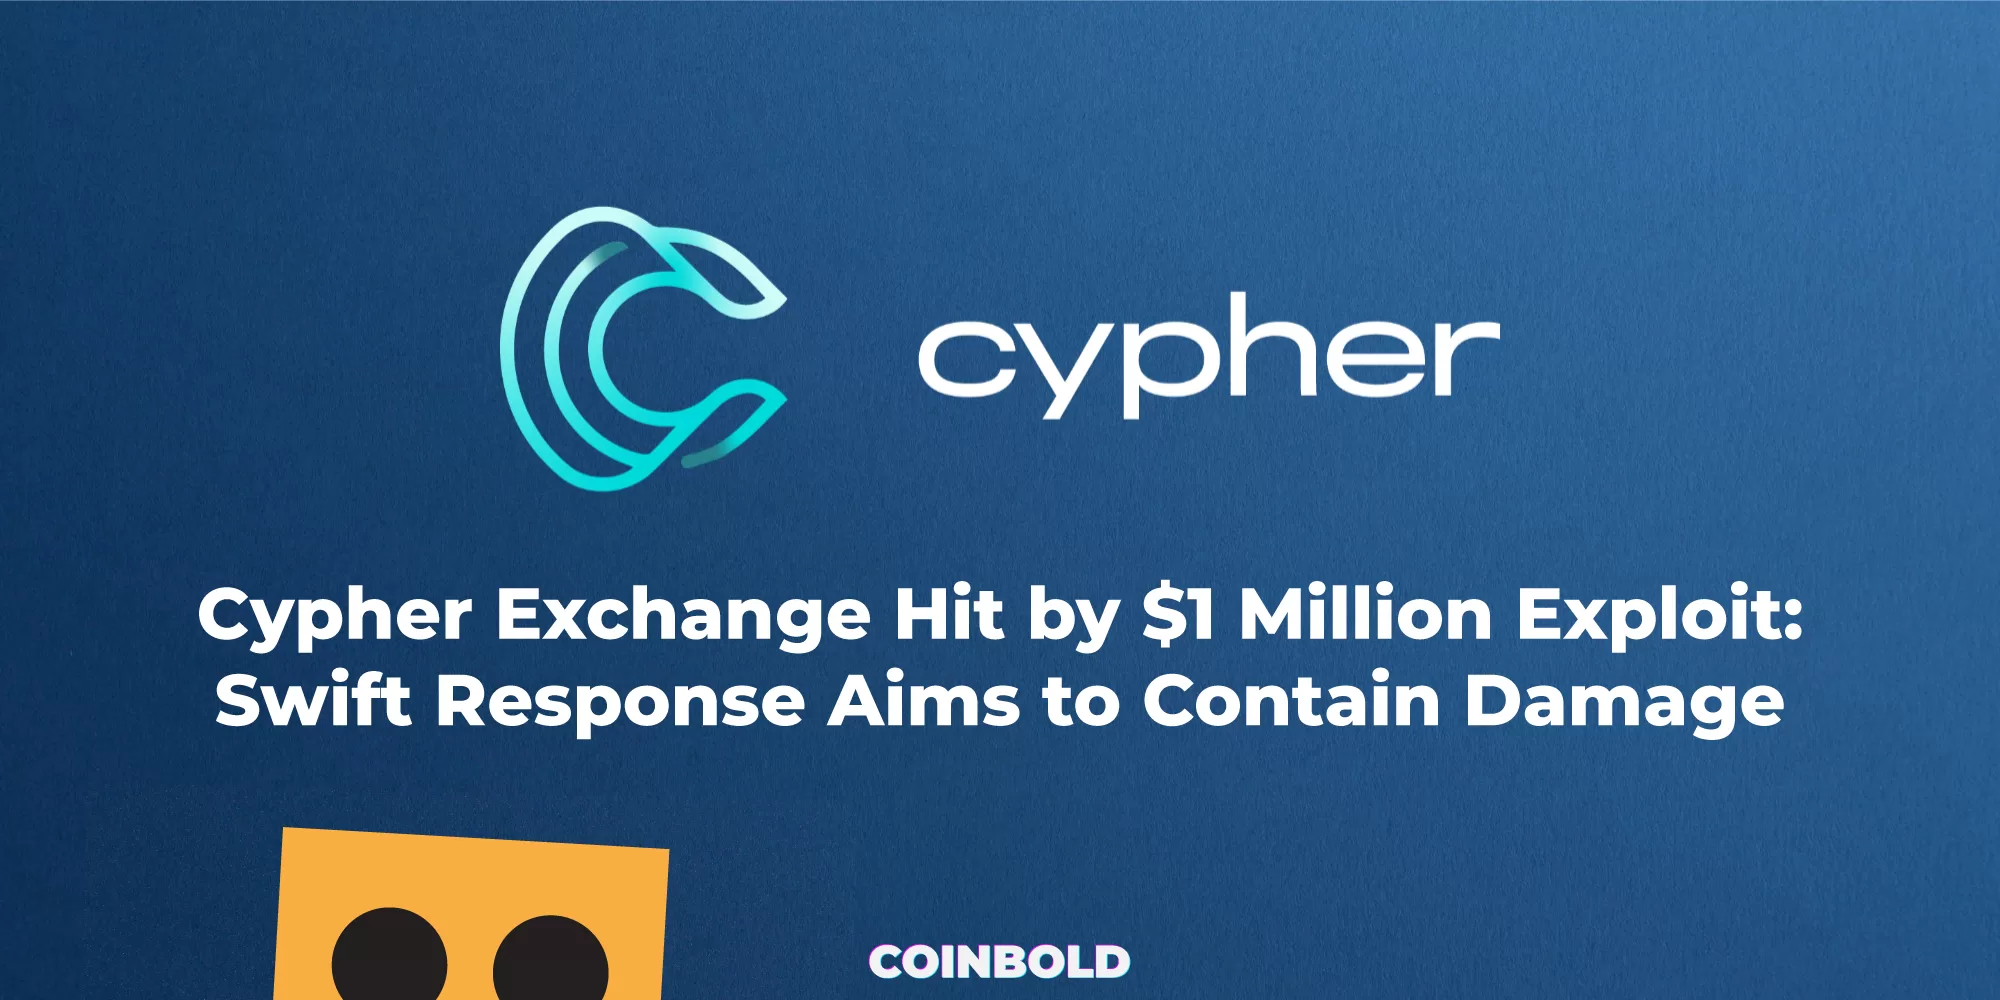 Cypher Exchange Hit by $1 Million Exploit Swift Response Aims to Contain Damage